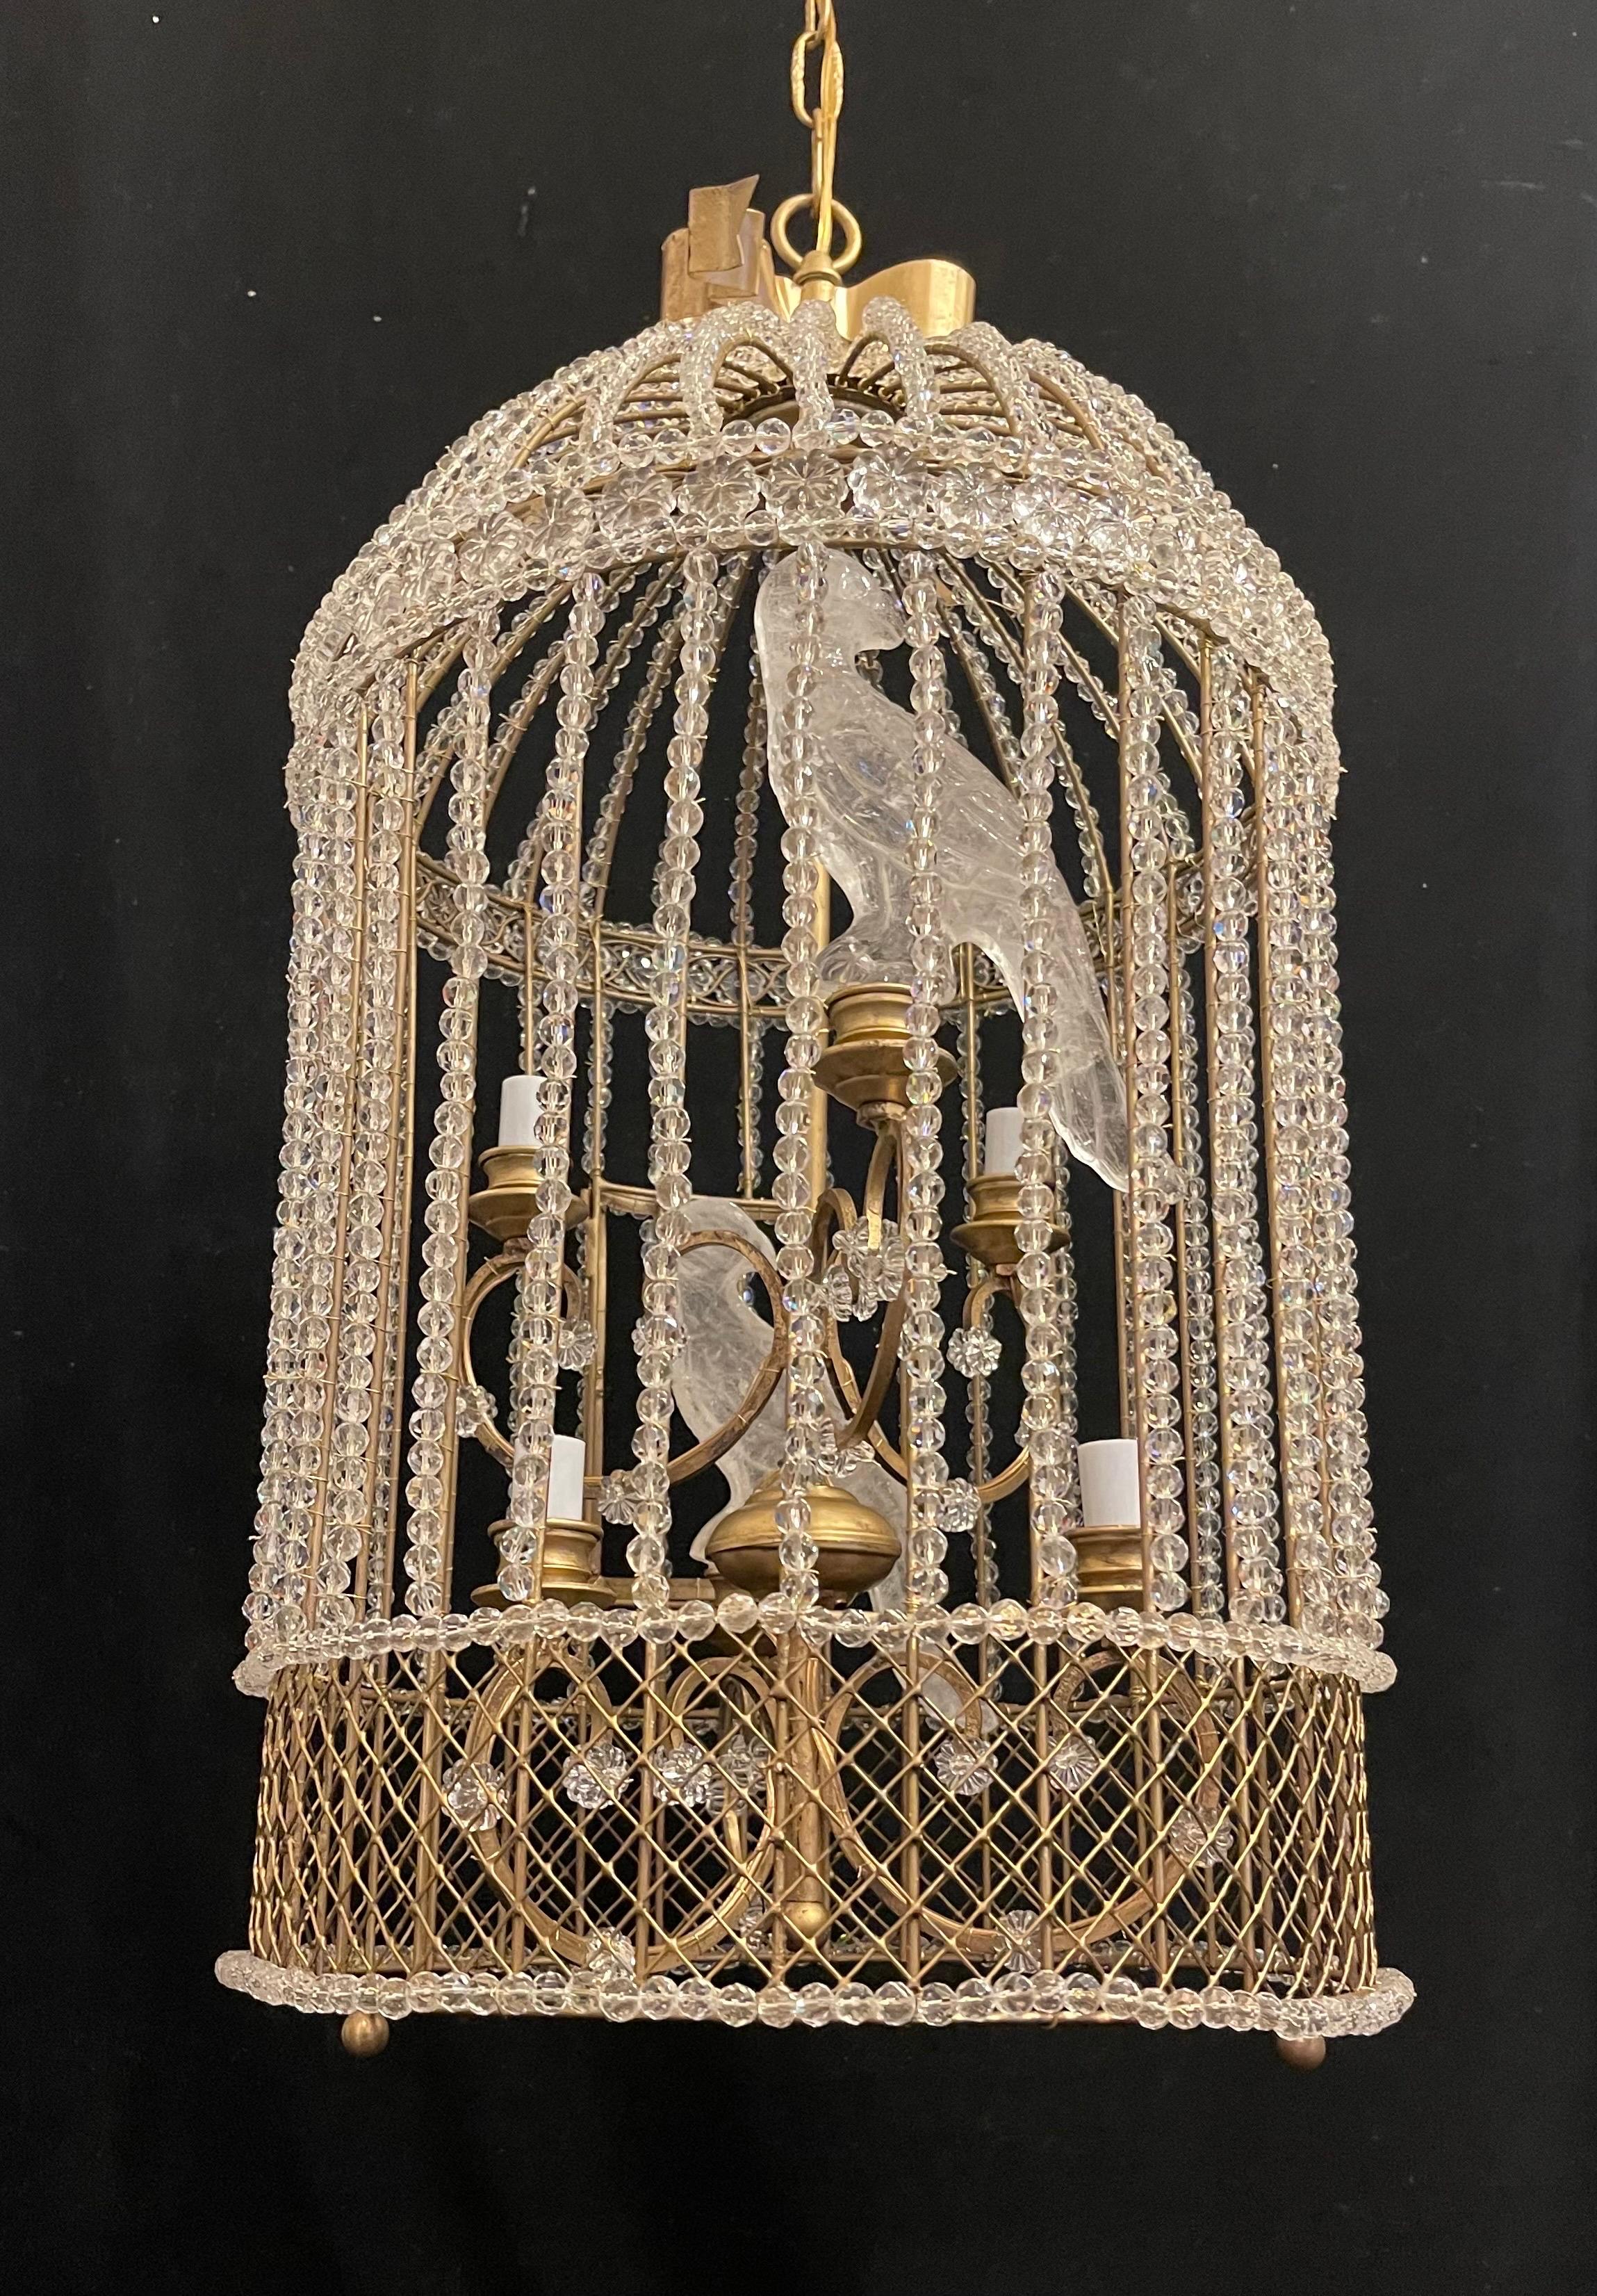 French Rare & Wonderful Maison Baguès Beaded Rock Crystal Parrot Bird Cage Chandelier 